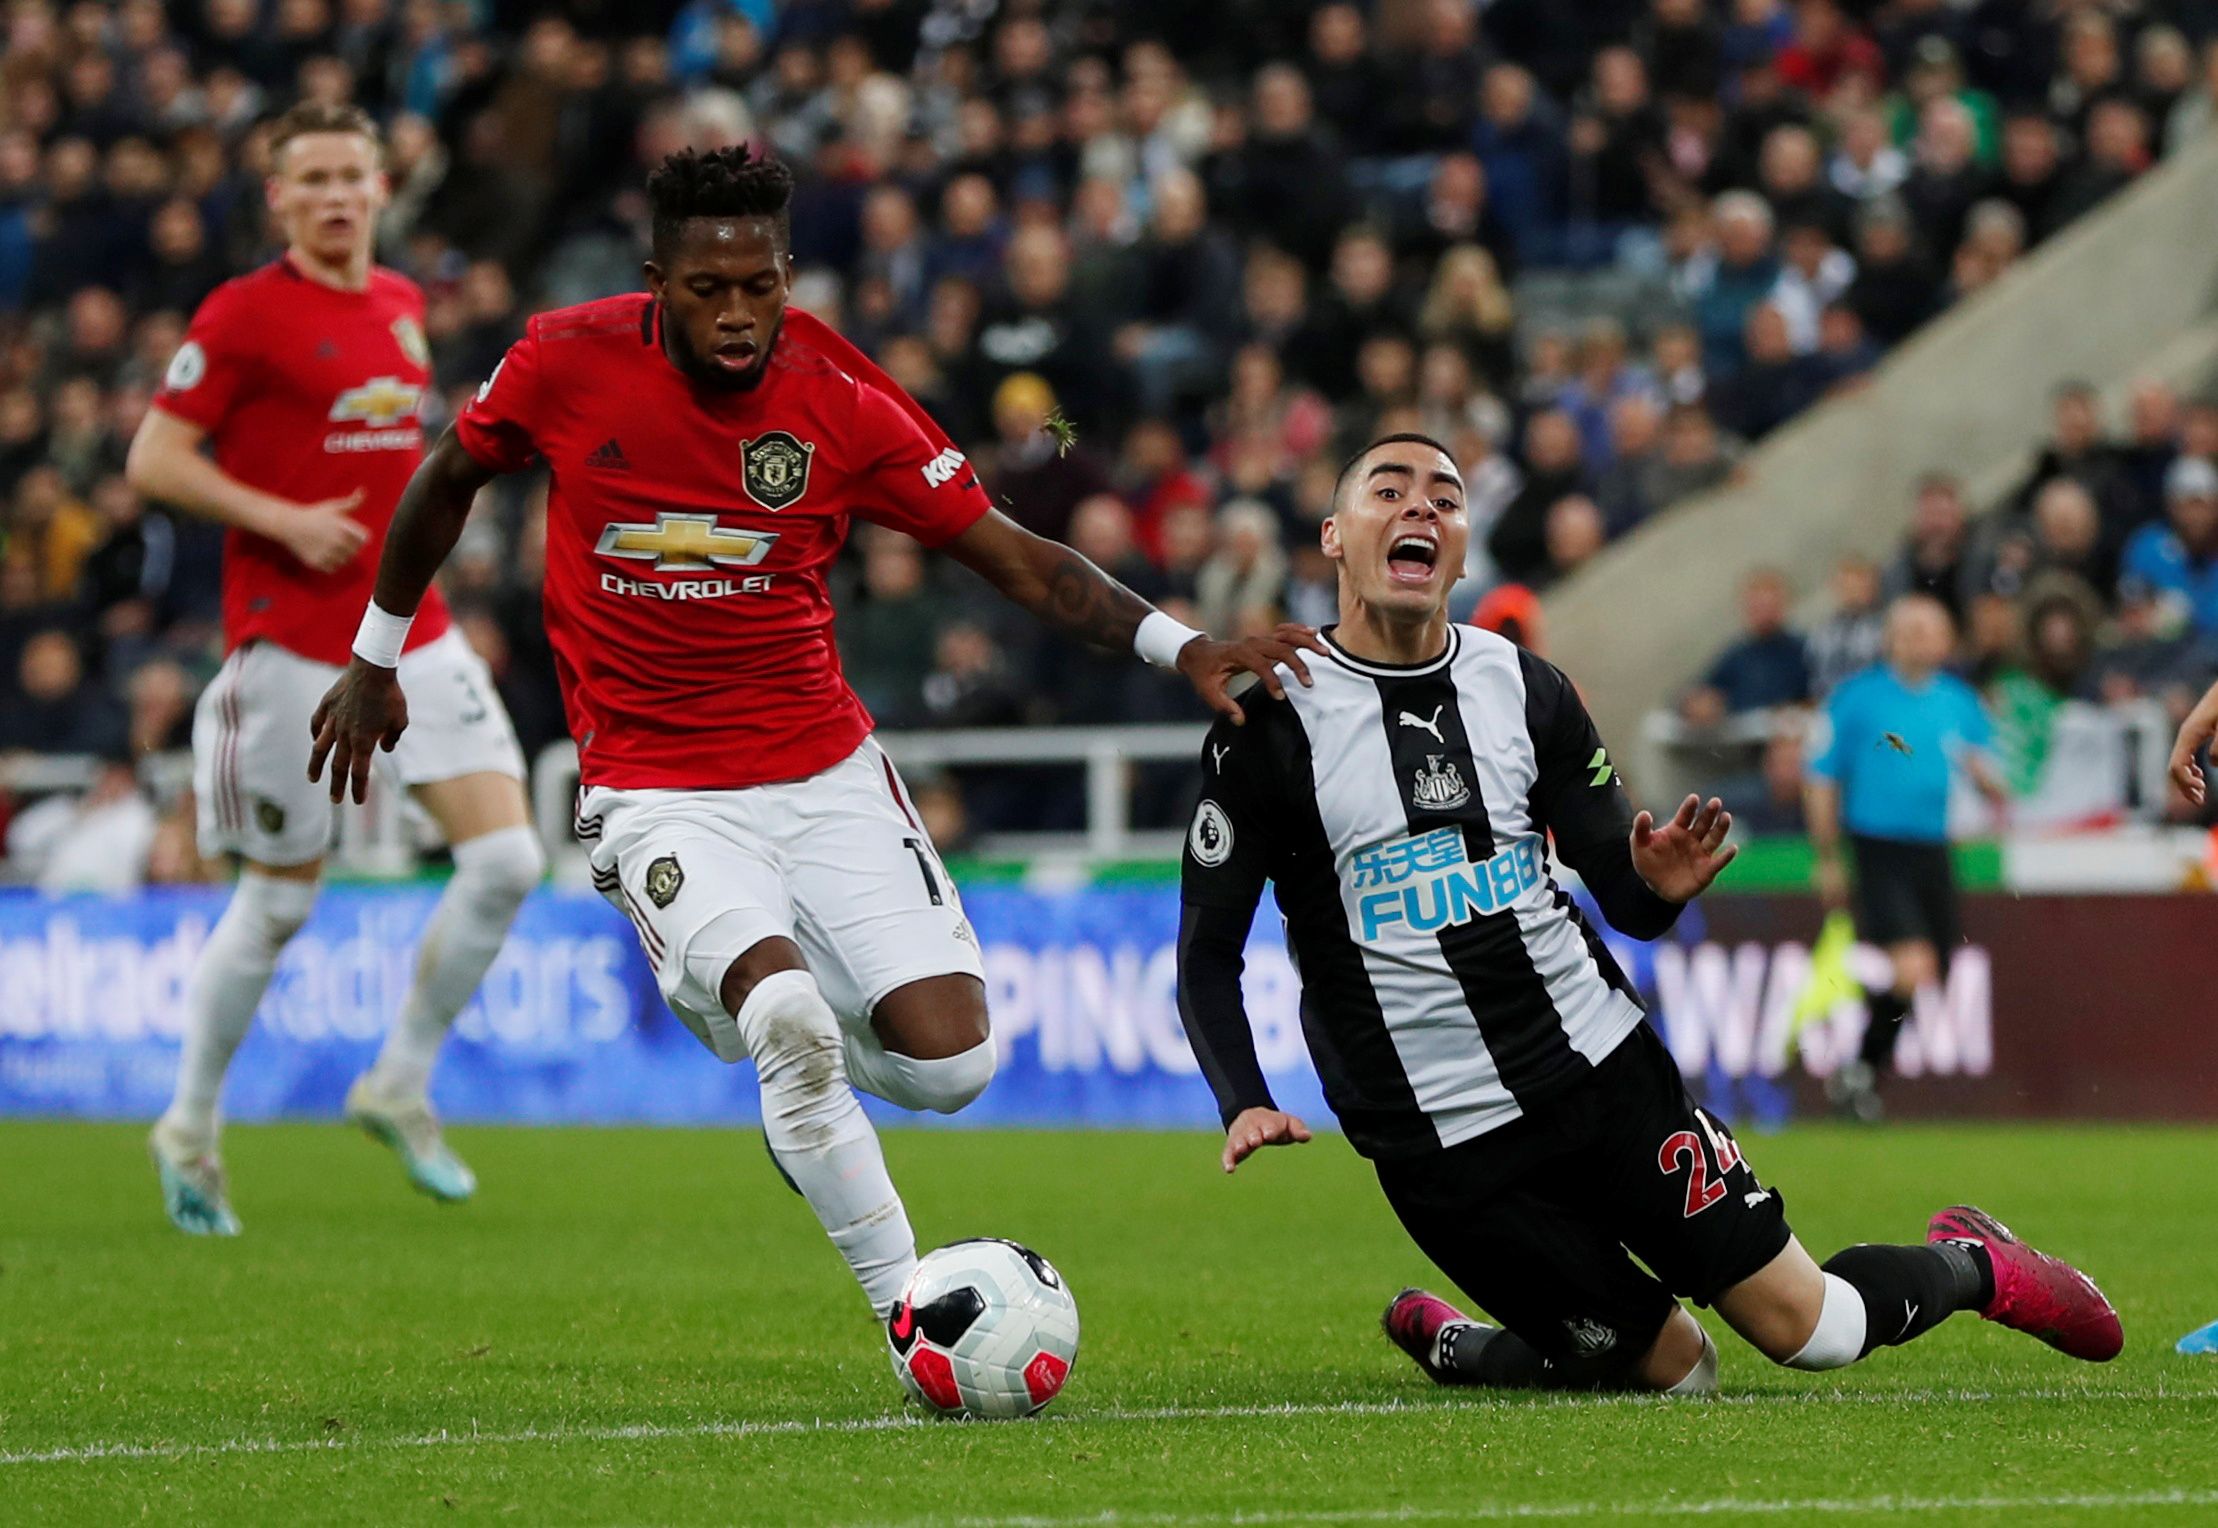 Soccer Football - Premier League - Newcastle United v Manchester United - St James' Park, Newcastle, Britain - October 6, 2019  Newcastle United's Miguel Almiron reacts as Manchester United's Fred plays on  Action Images via Reuters/Lee Smith  EDITORIAL USE ONLY. No use with unauthorized audio, video, data, fixture lists, club/league logos or 